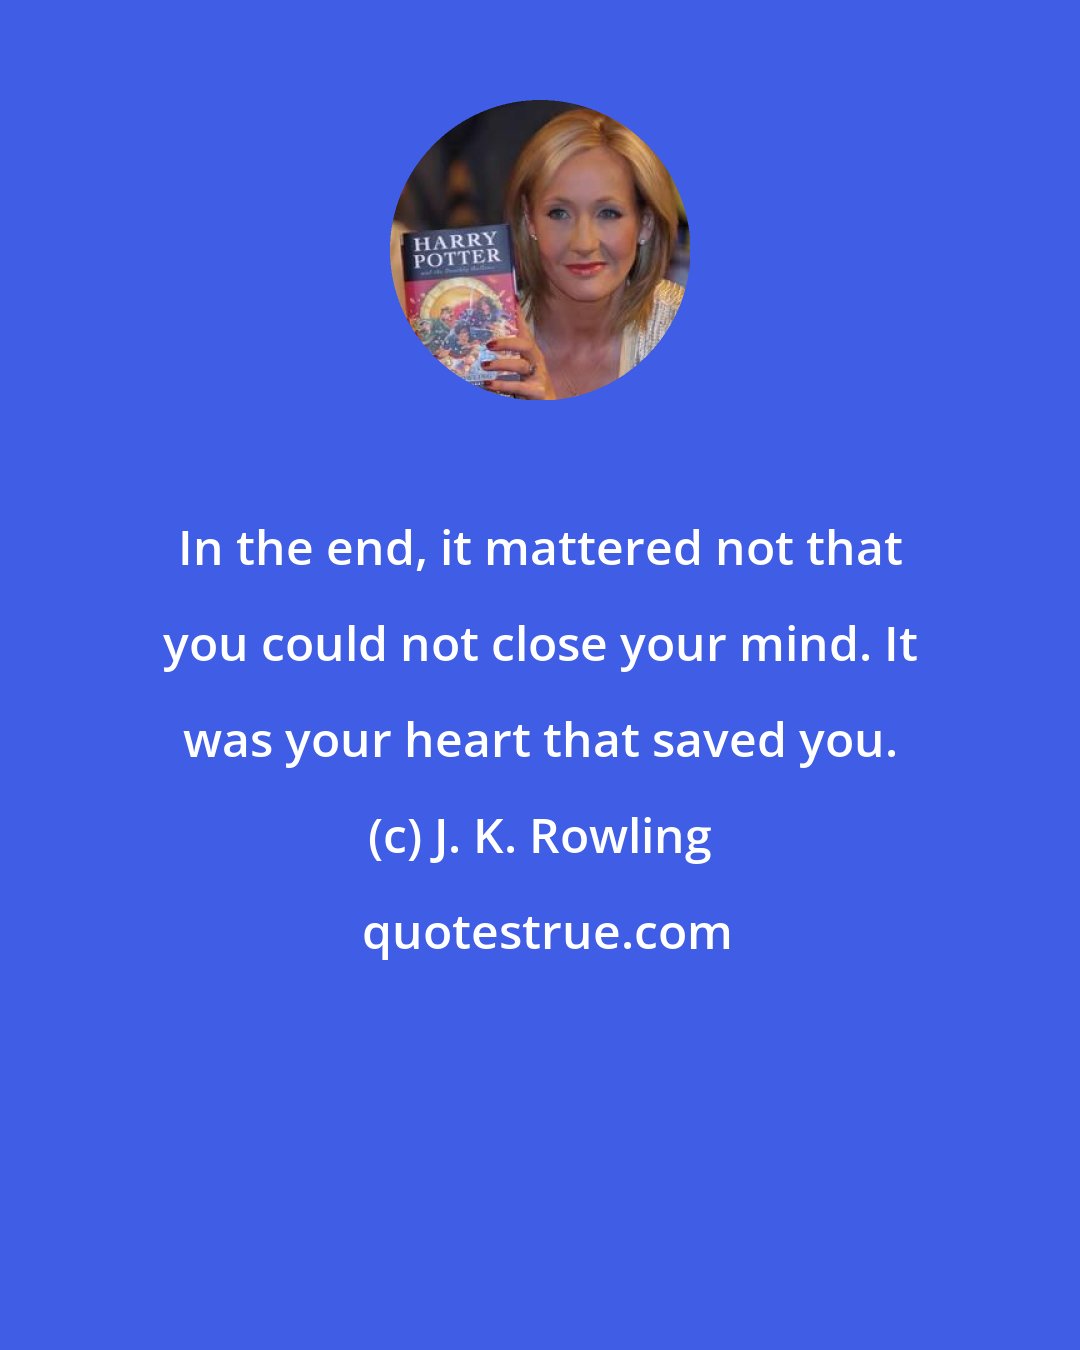 J. K. Rowling: In the end, it mattered not that you could not close your mind. It was your heart that saved you.